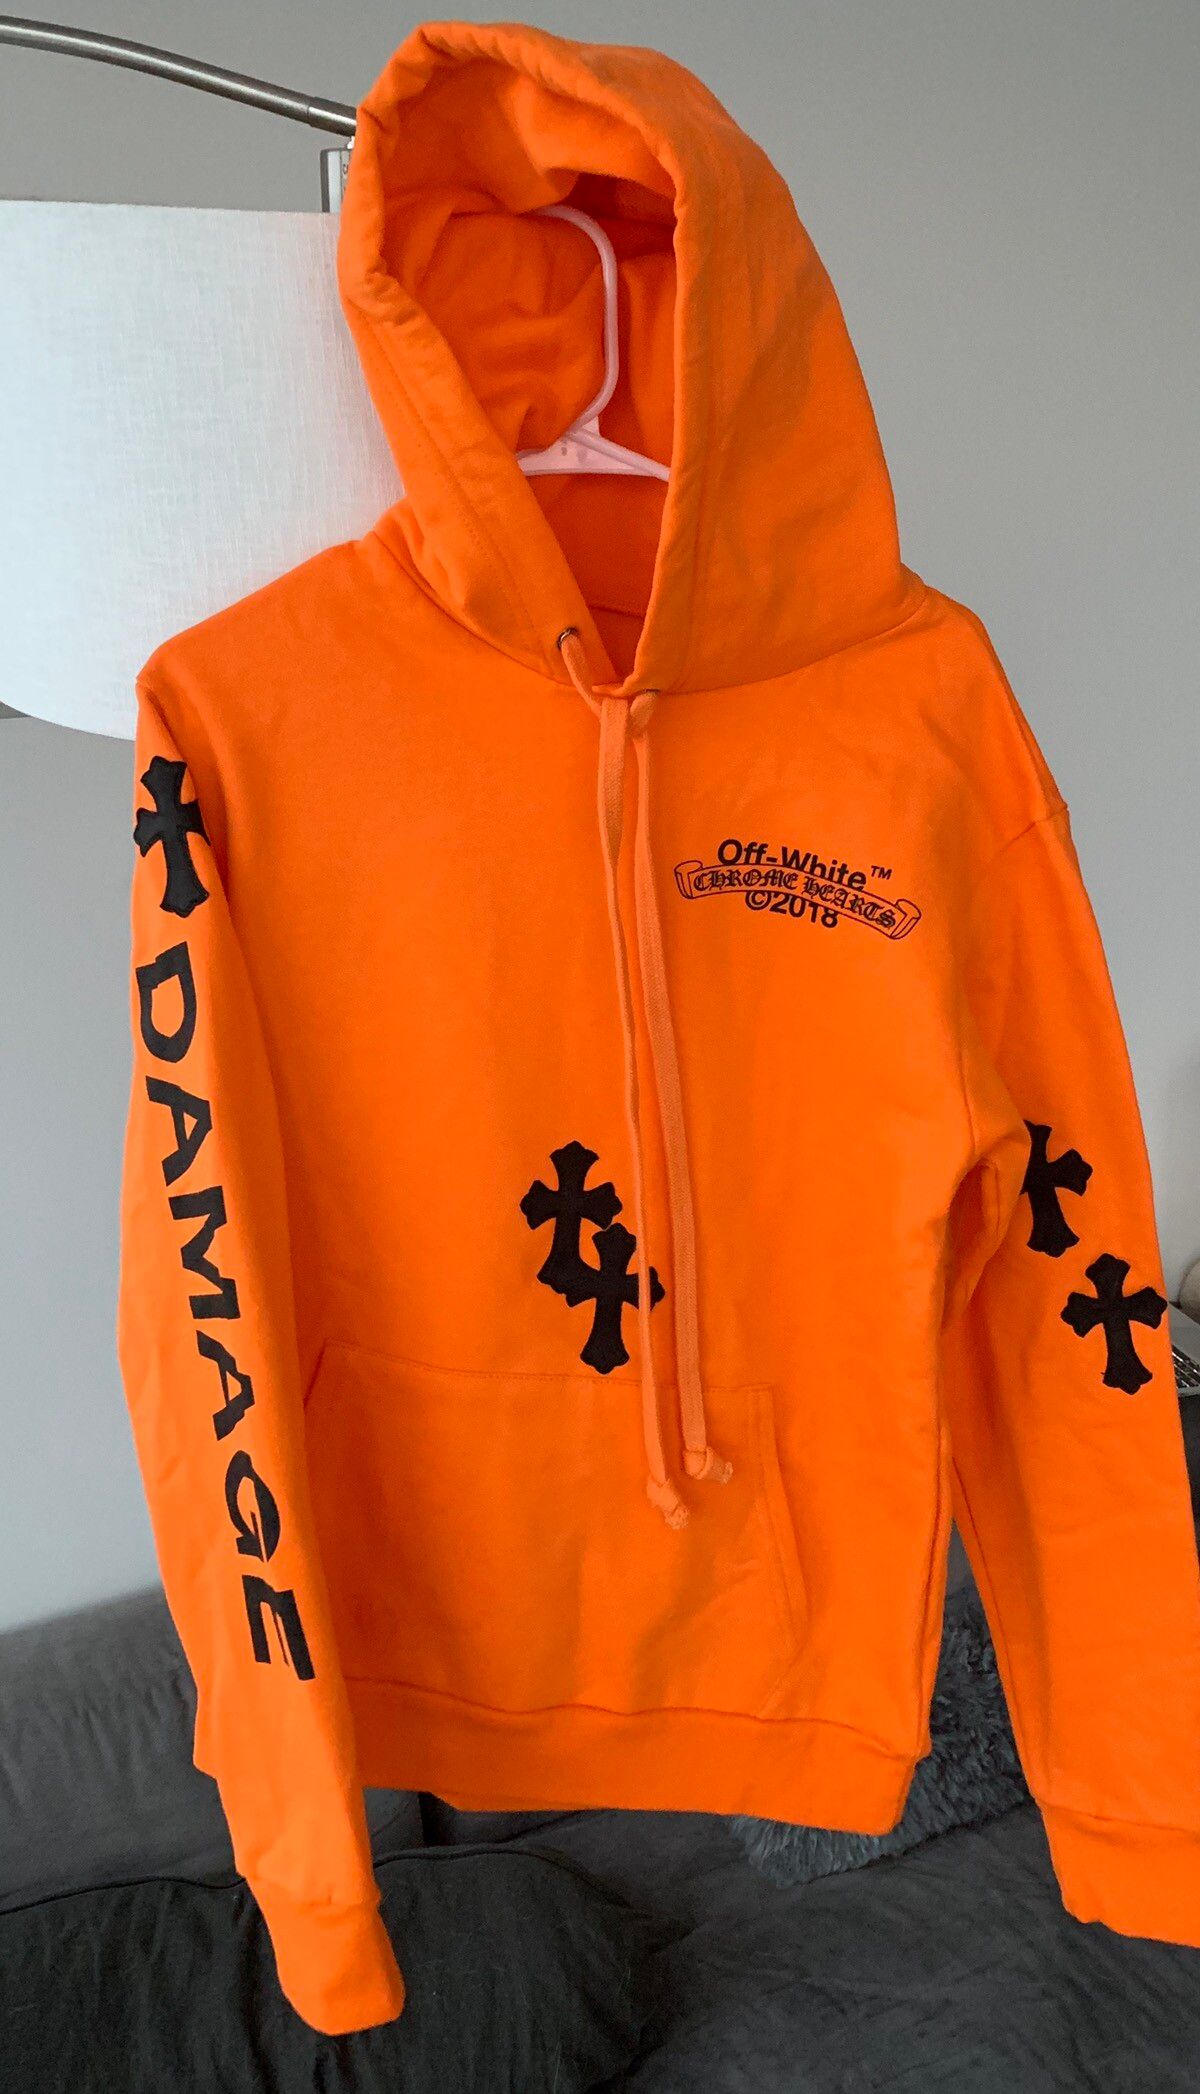 Off-White ART BASEL 2018 Exclusive Chrome Hearts x Off-White Hoodie ...